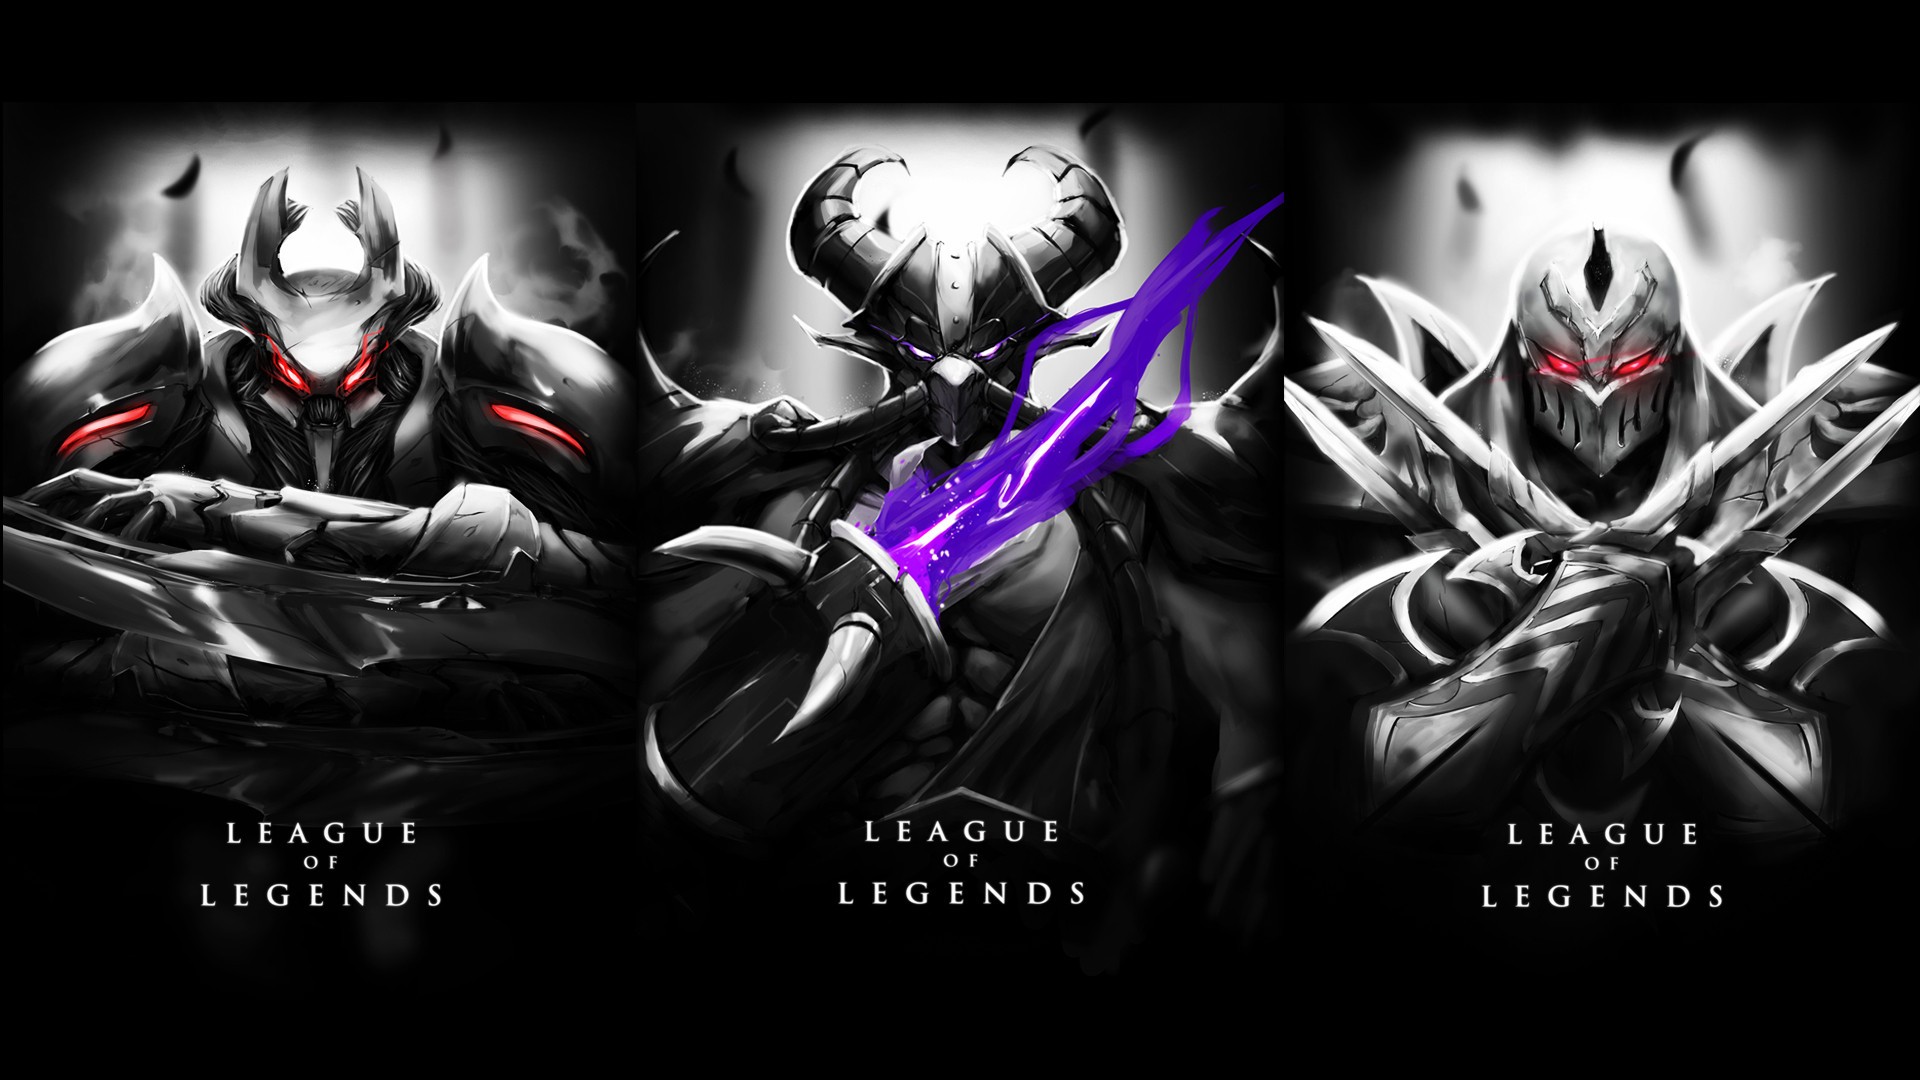 General 1920x1080 League of Legends Nocturne Kassadin Zed PC gaming collage selective coloring